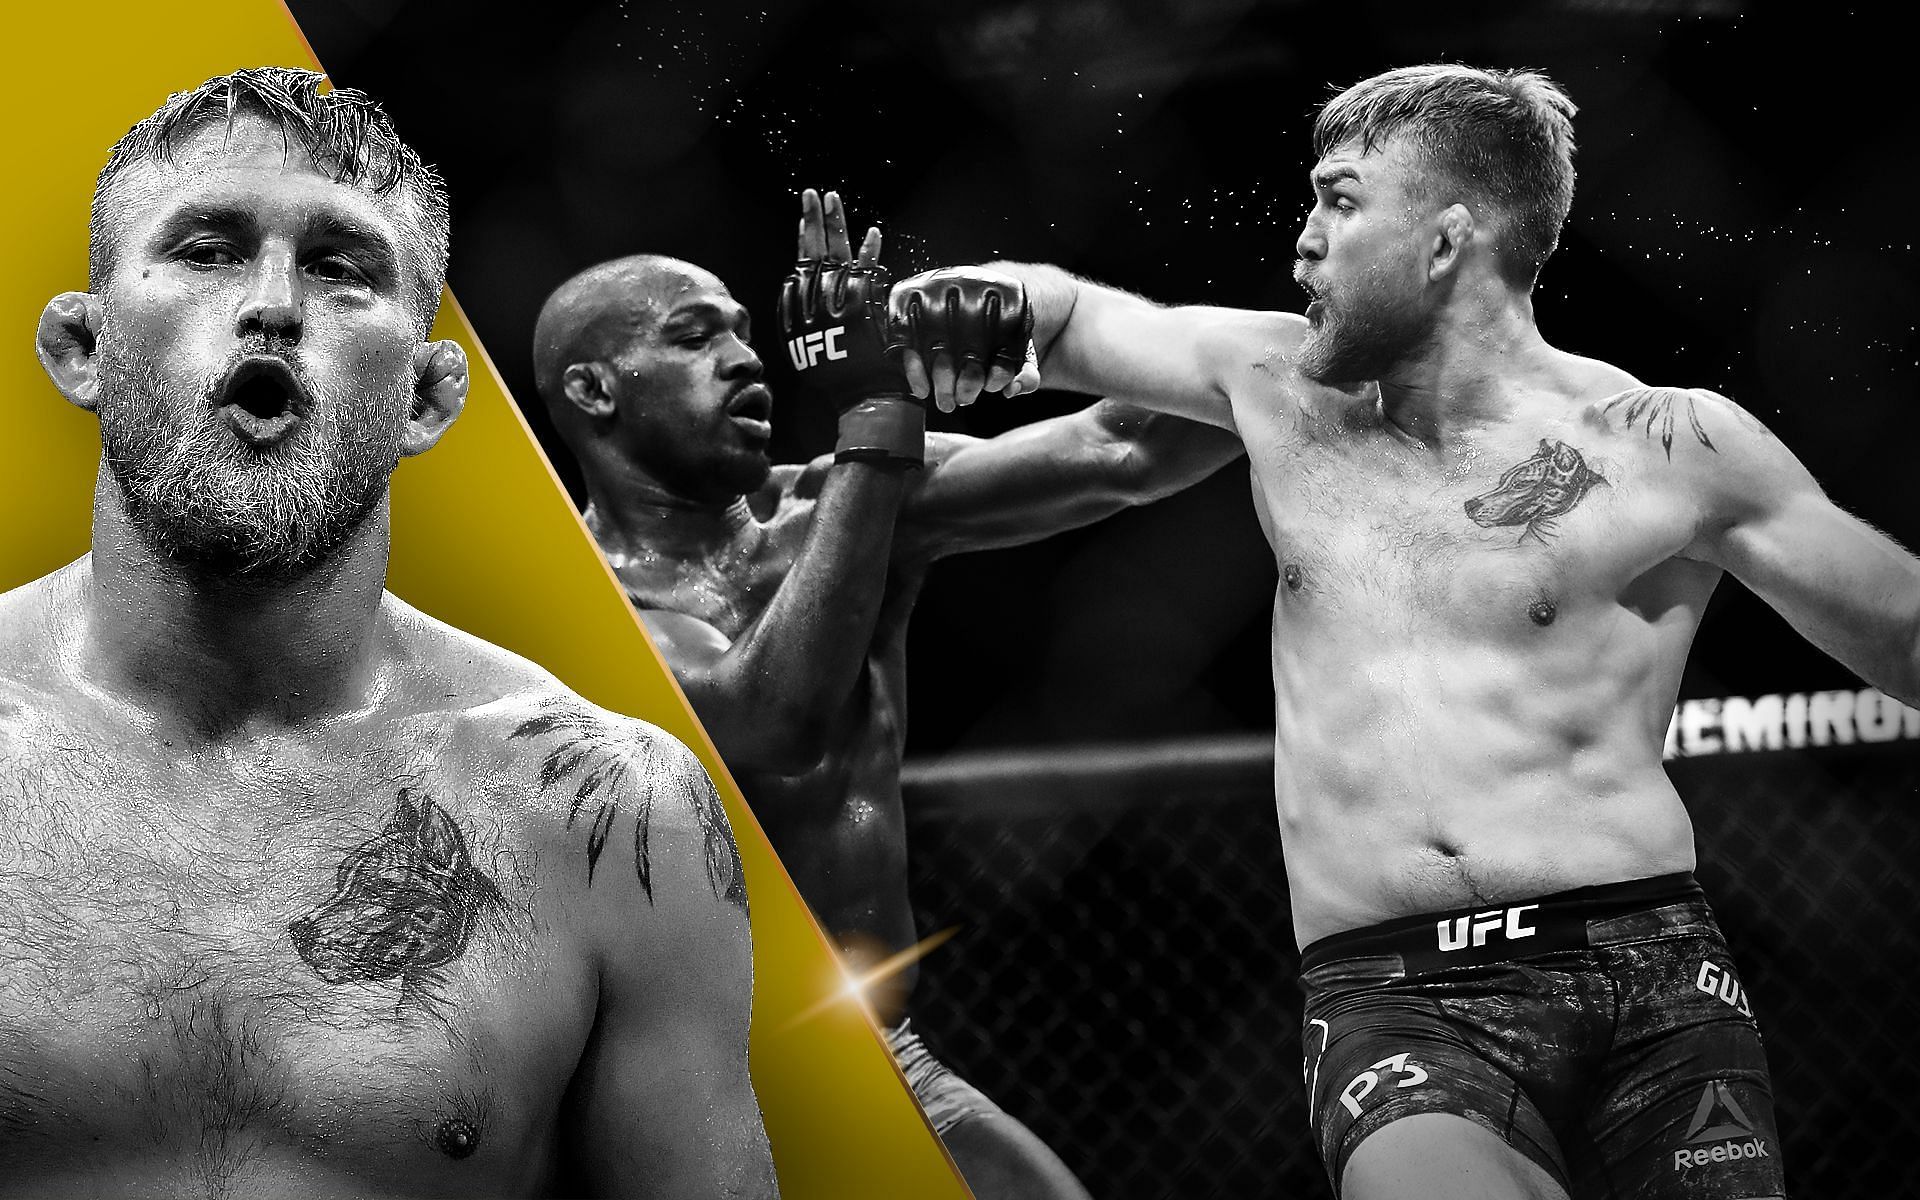 Alexander Gustafsson looks back at his iconic first fight against Jon Jones (images via: Getty)